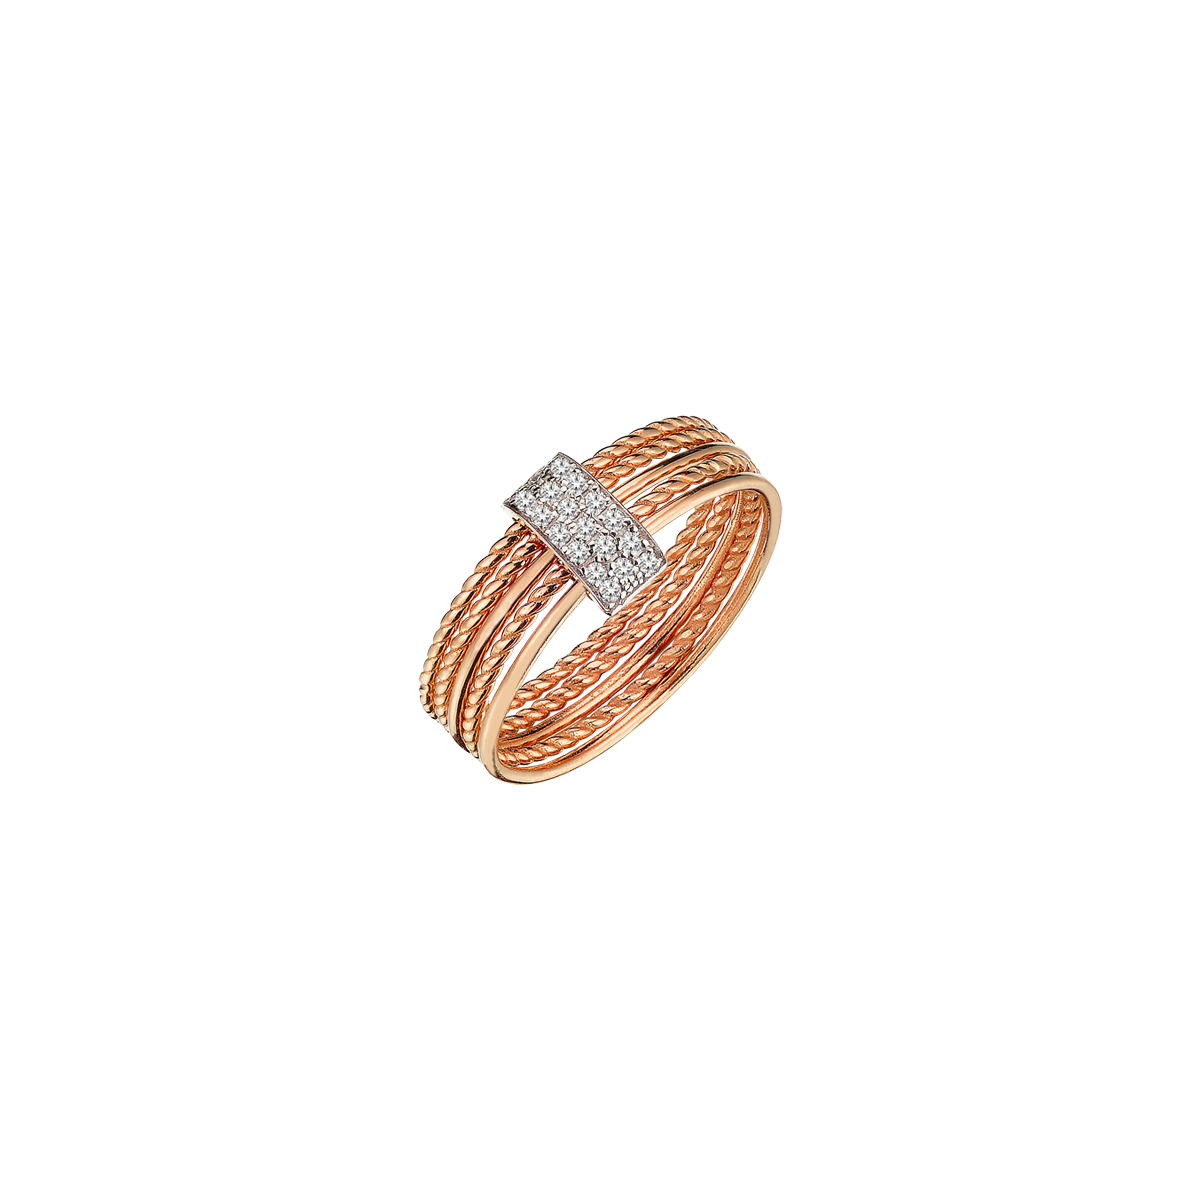 Mini Attached Coils Ring in Rose Gold - Her Story Shop